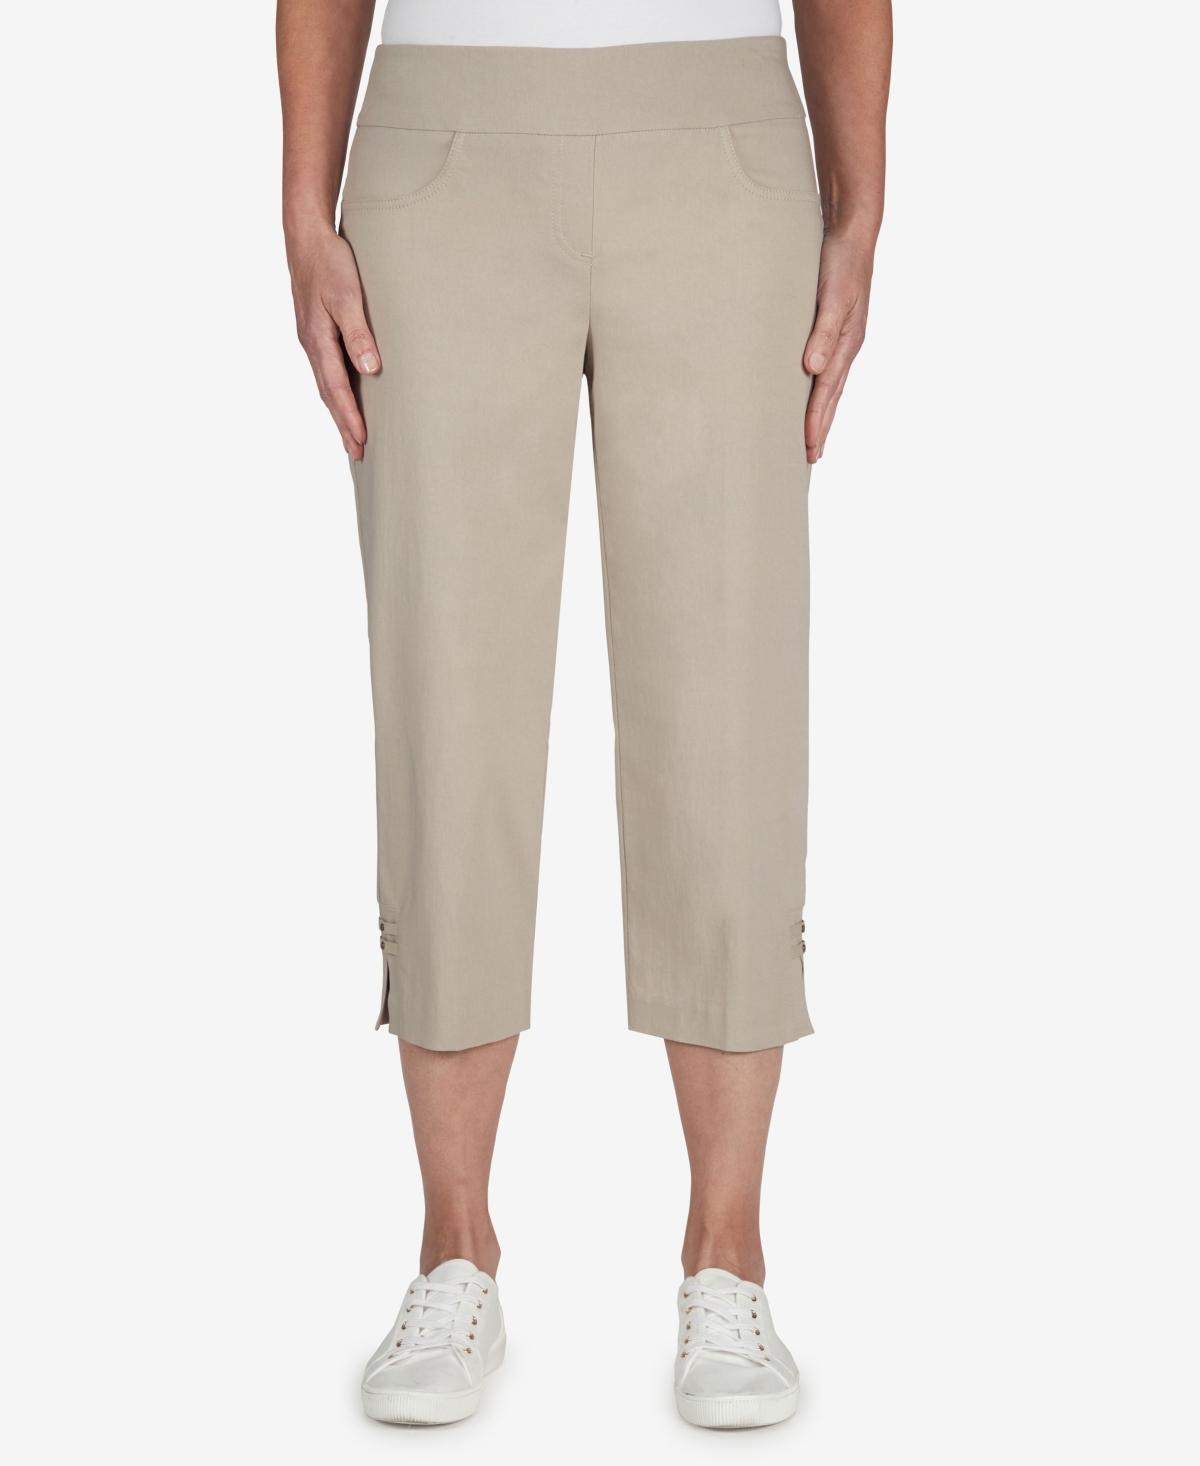 Shop Hearts Of Palm Plus Size Essentials Solid Pull-on Capri Pants With Detailed Split Hem In Chino